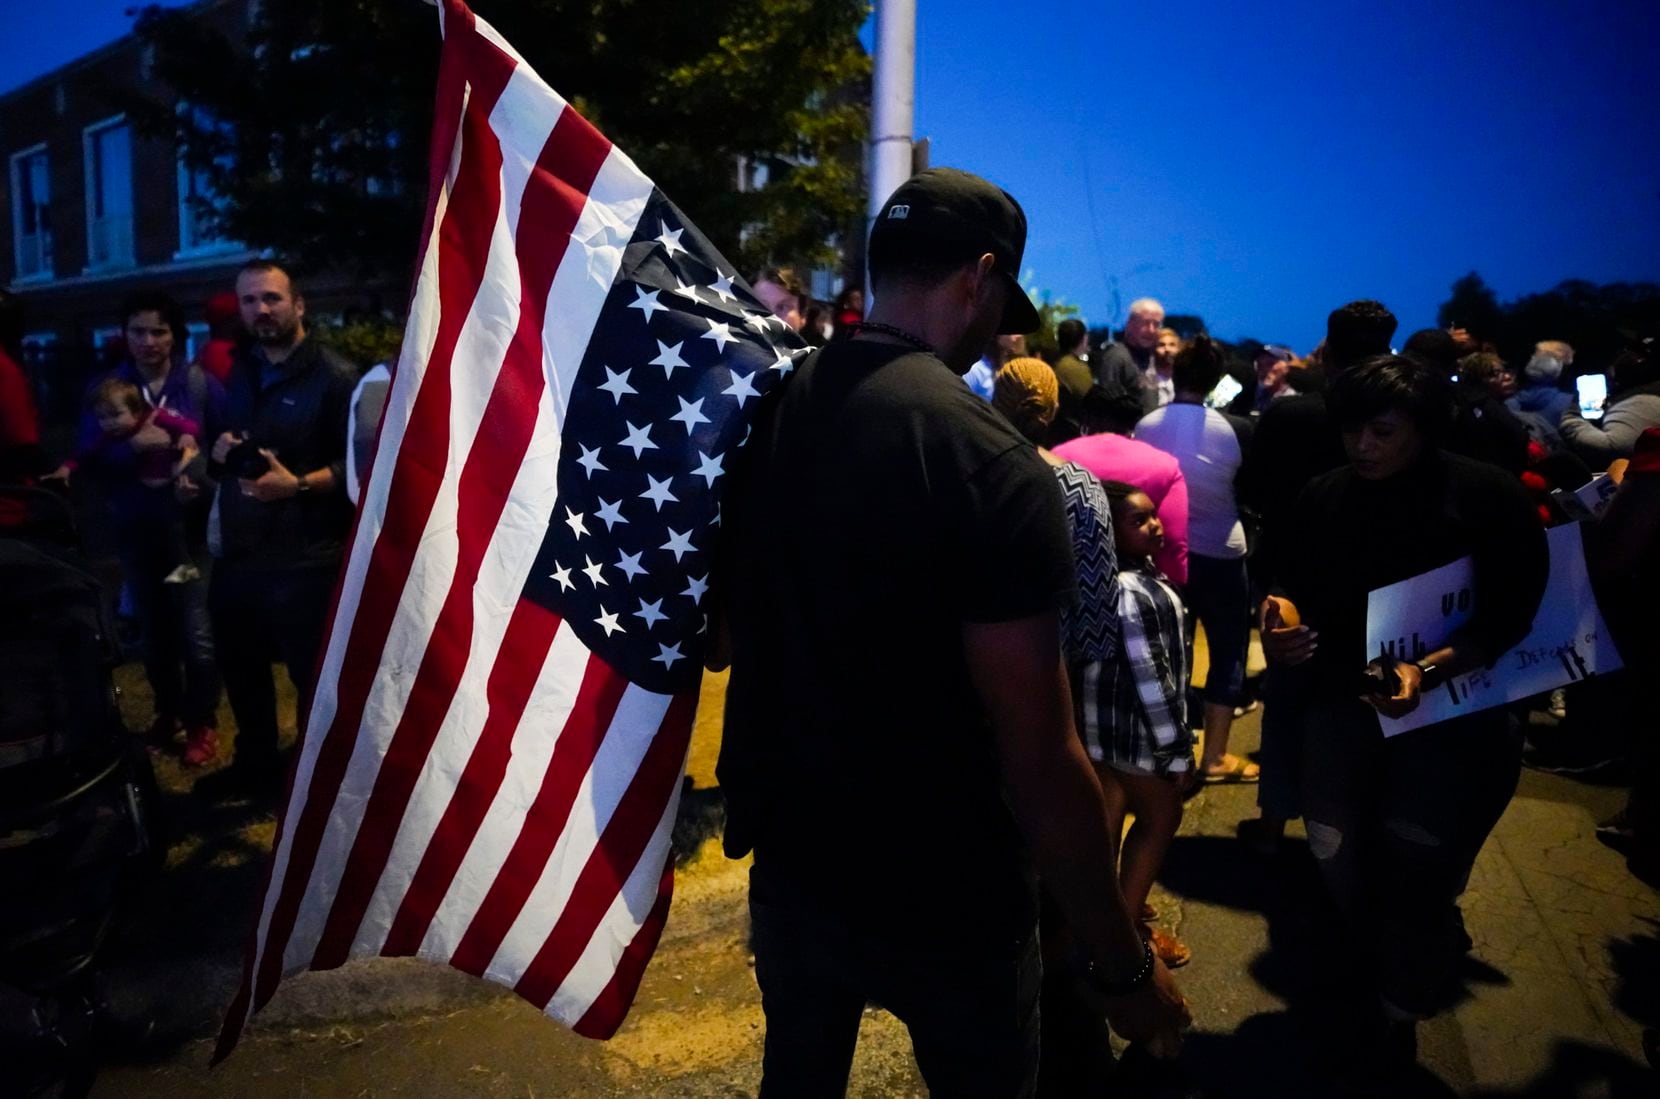 A large crowd of protestors, including a man carrying an upside-down American flag, gathered...